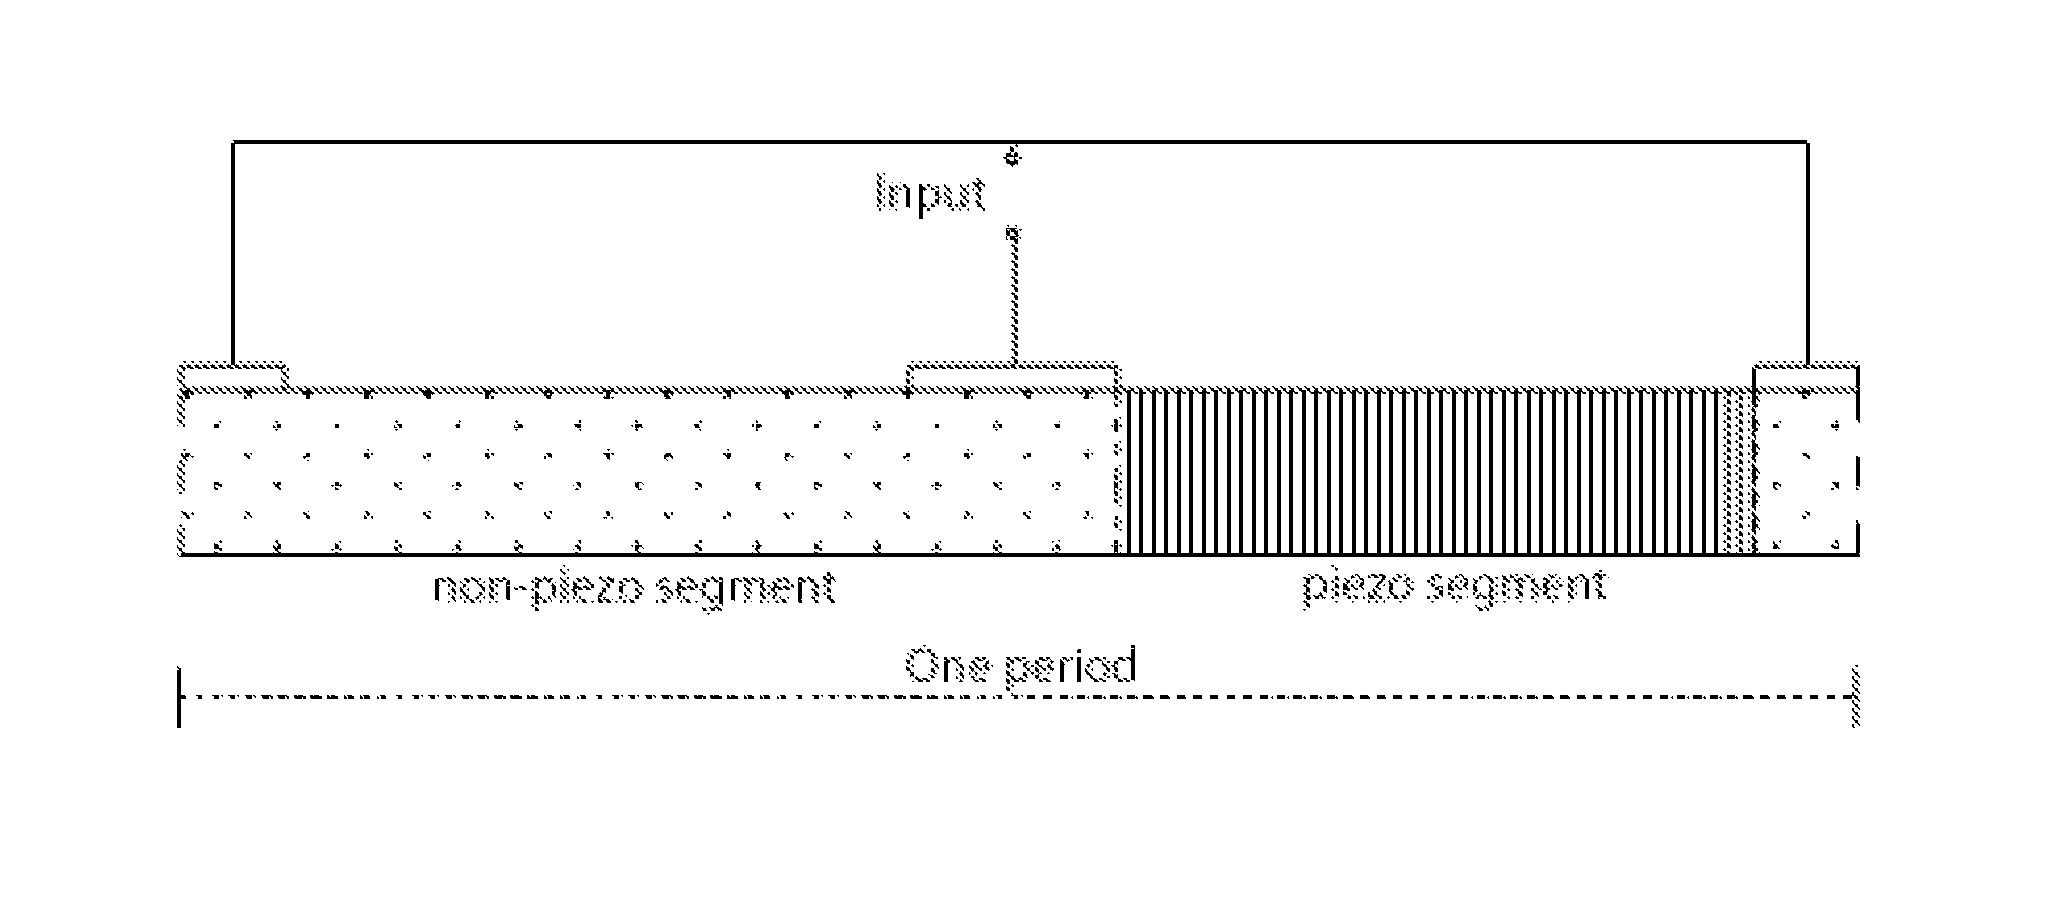 Piezoelectric resonator operating in thickness shear mode